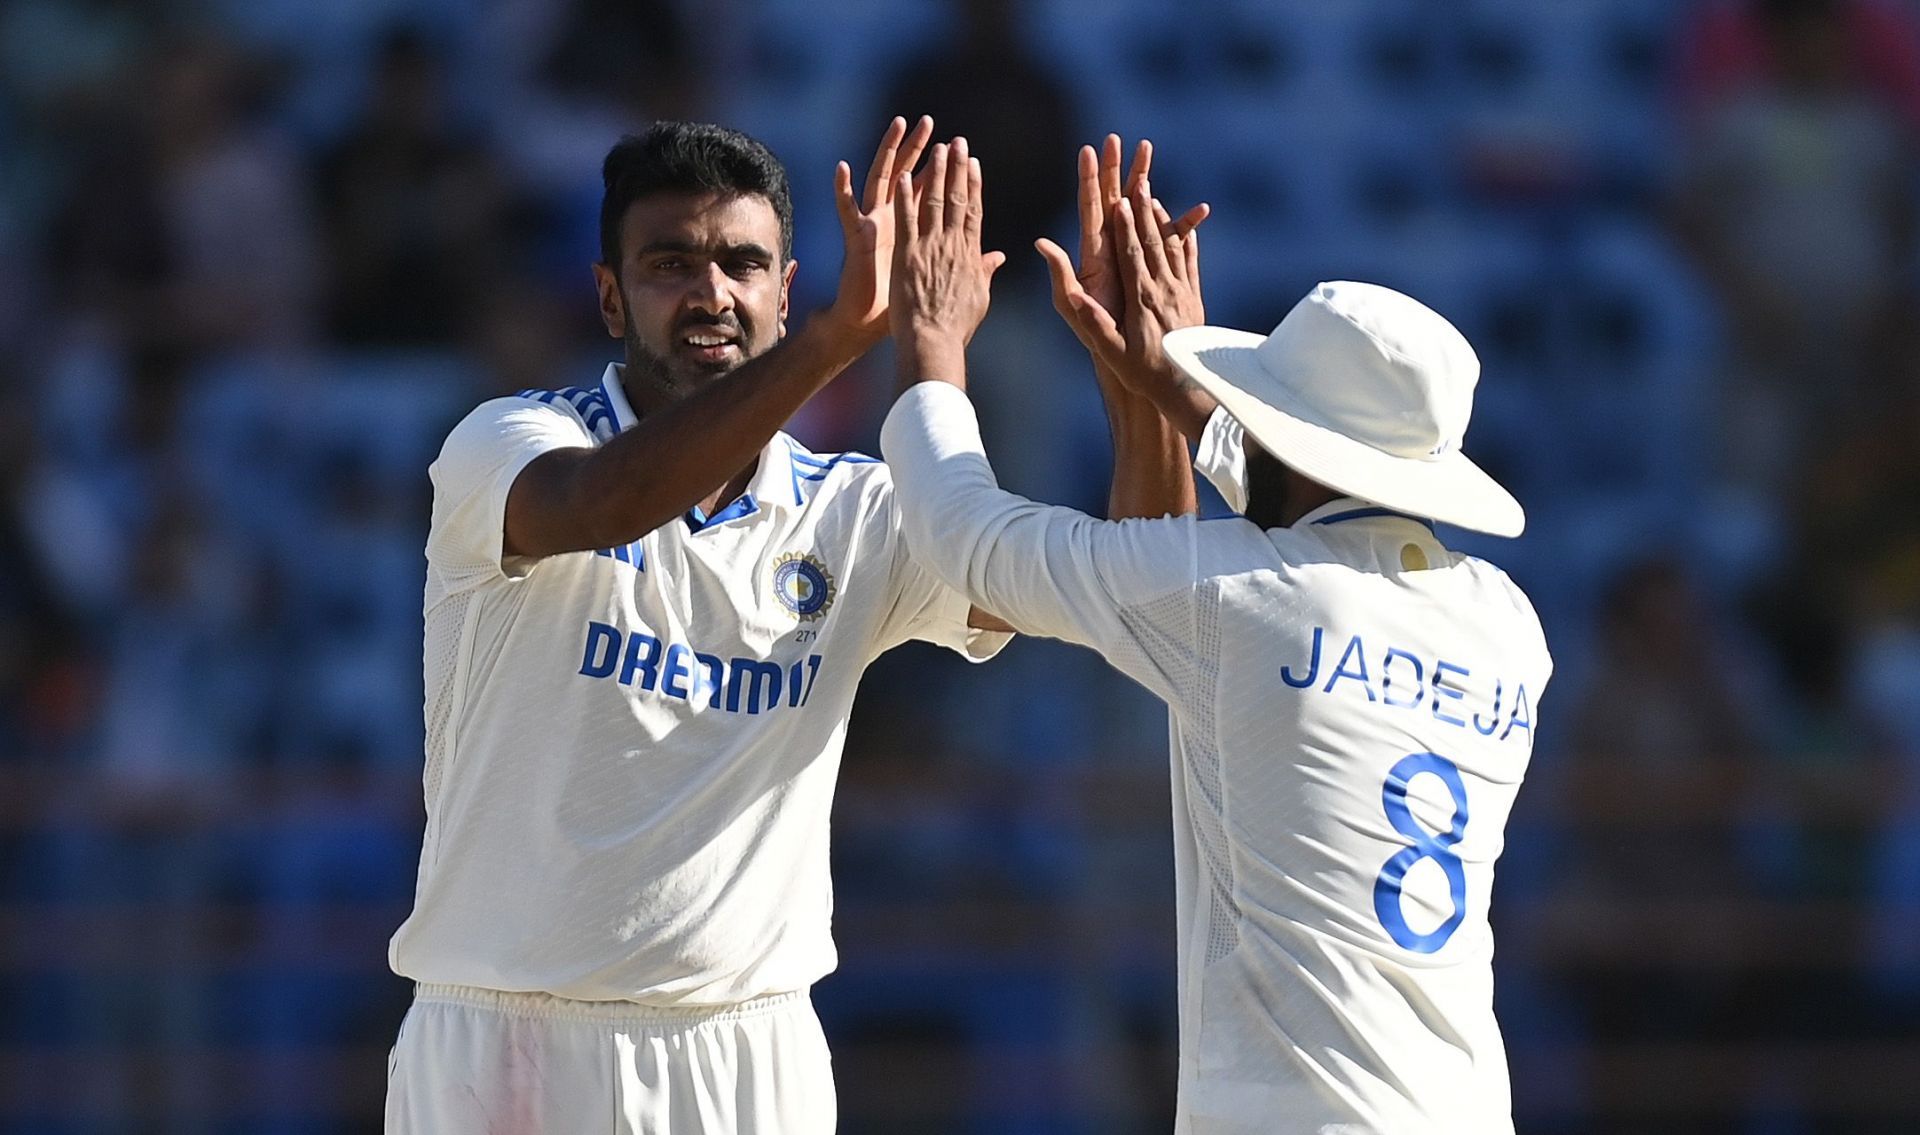 Ravichandran Ashwin has been dominant in home conditions. (Pic: Getty Images)